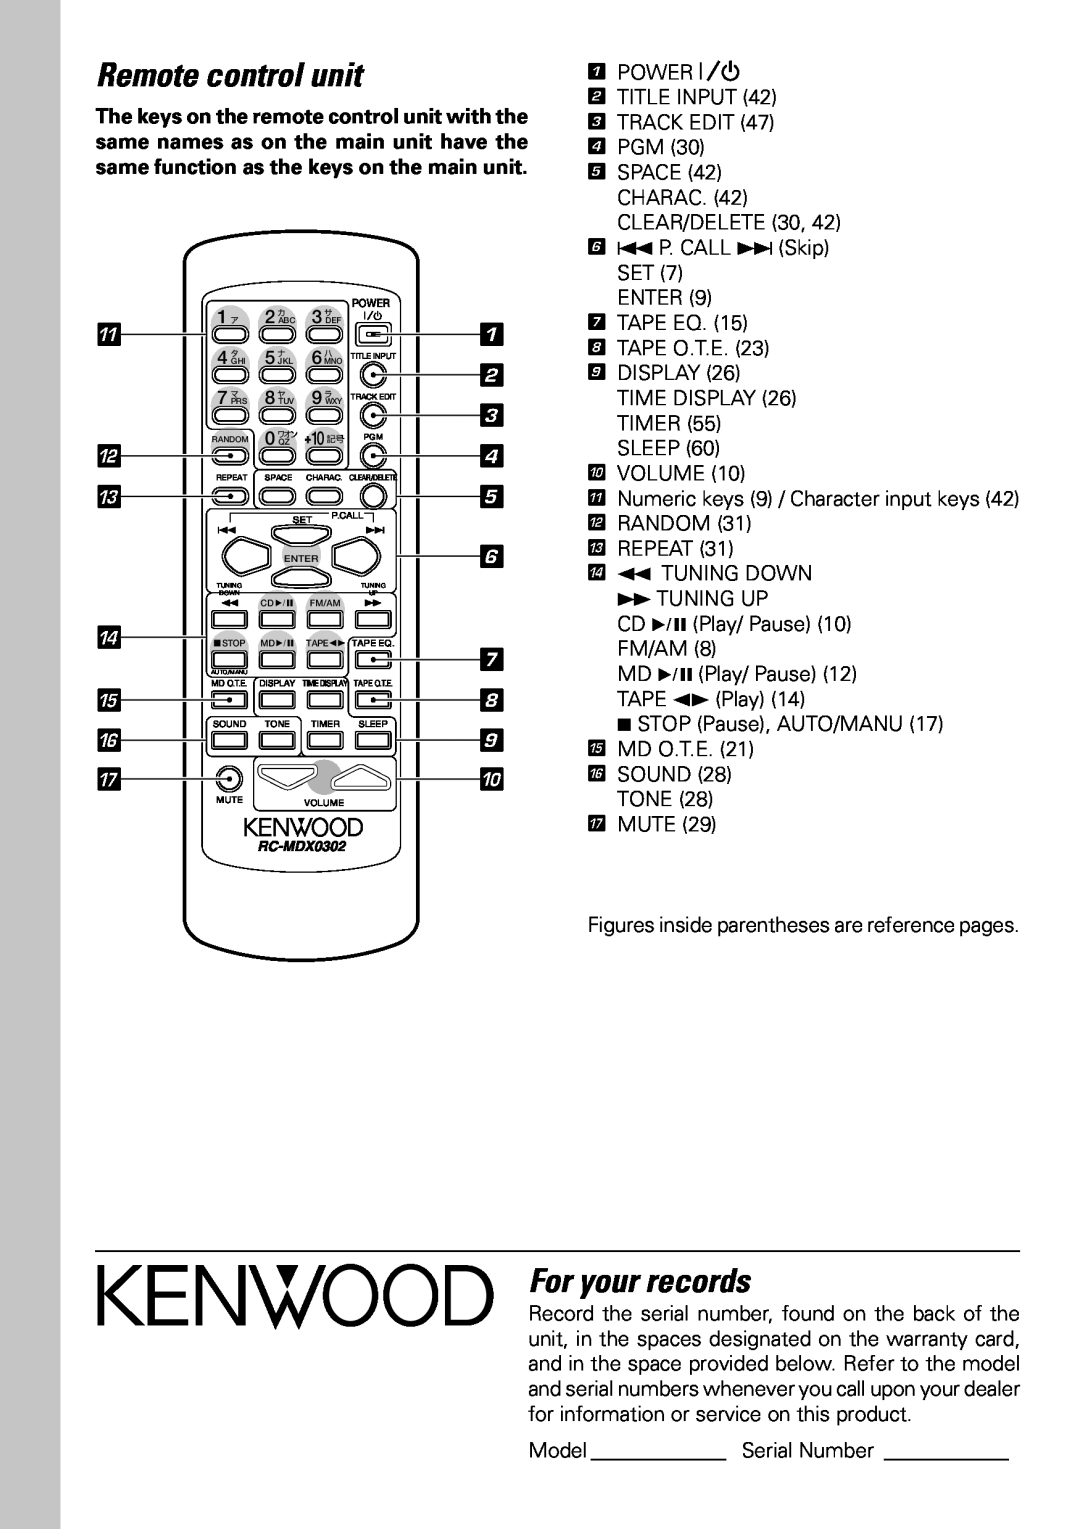 Kenwood MDX-G3 instruction manual Remote control unit, For your records 